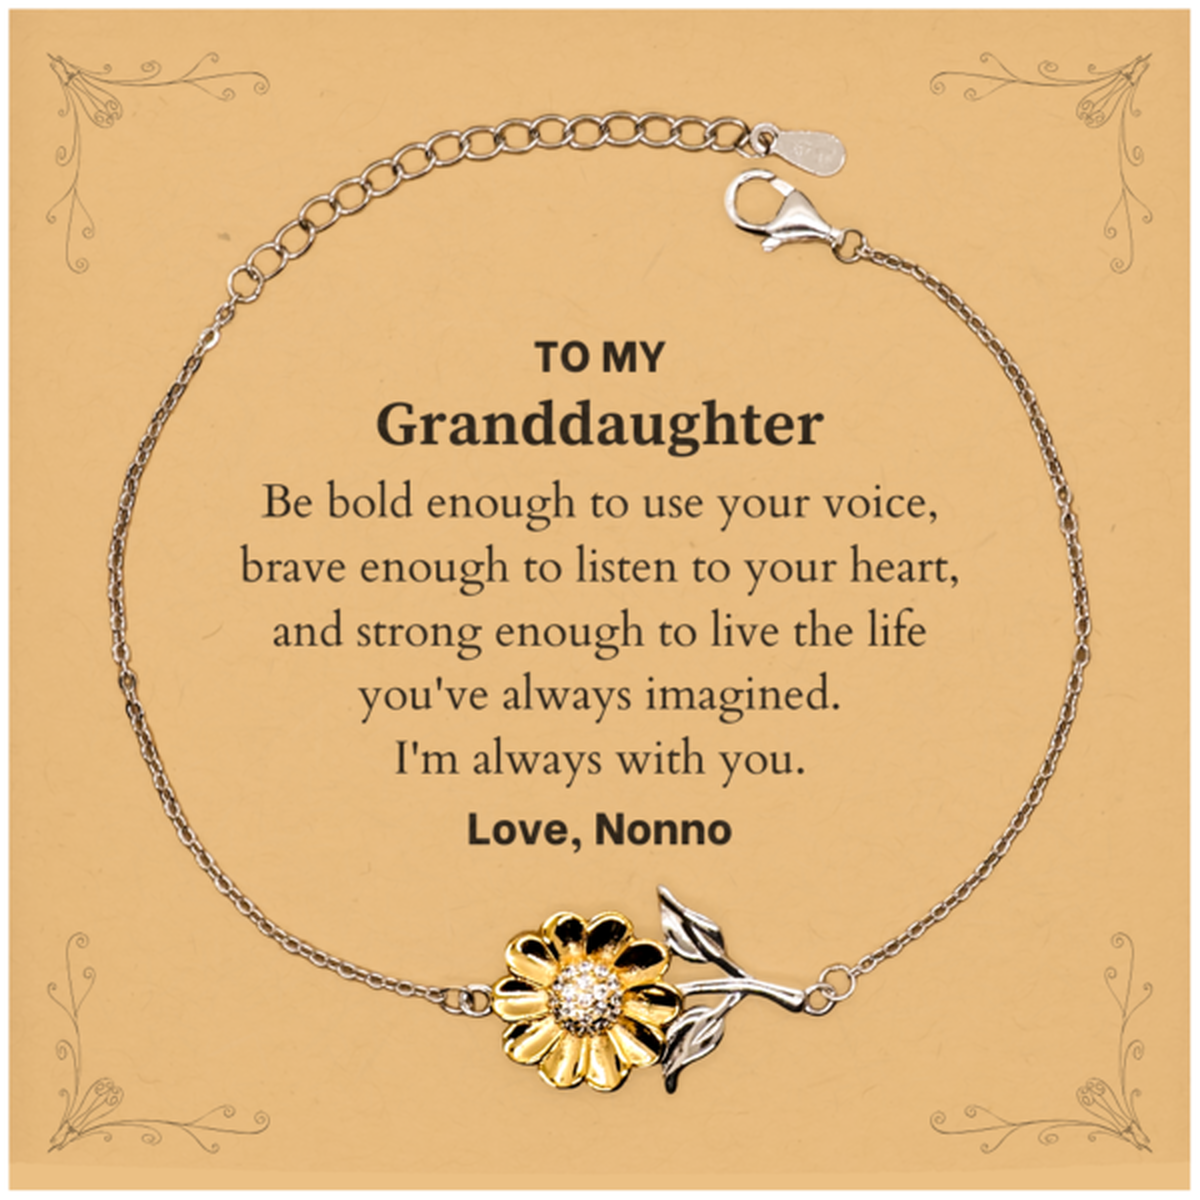 Keepsake Granddaughter Sunflower Bracelet Gift Idea Graduation Christmas Birthday Granddaughter from Nonno, Granddaughter Be bold enough to use your voice, brave enough to listen to your heart. Love, Nonno